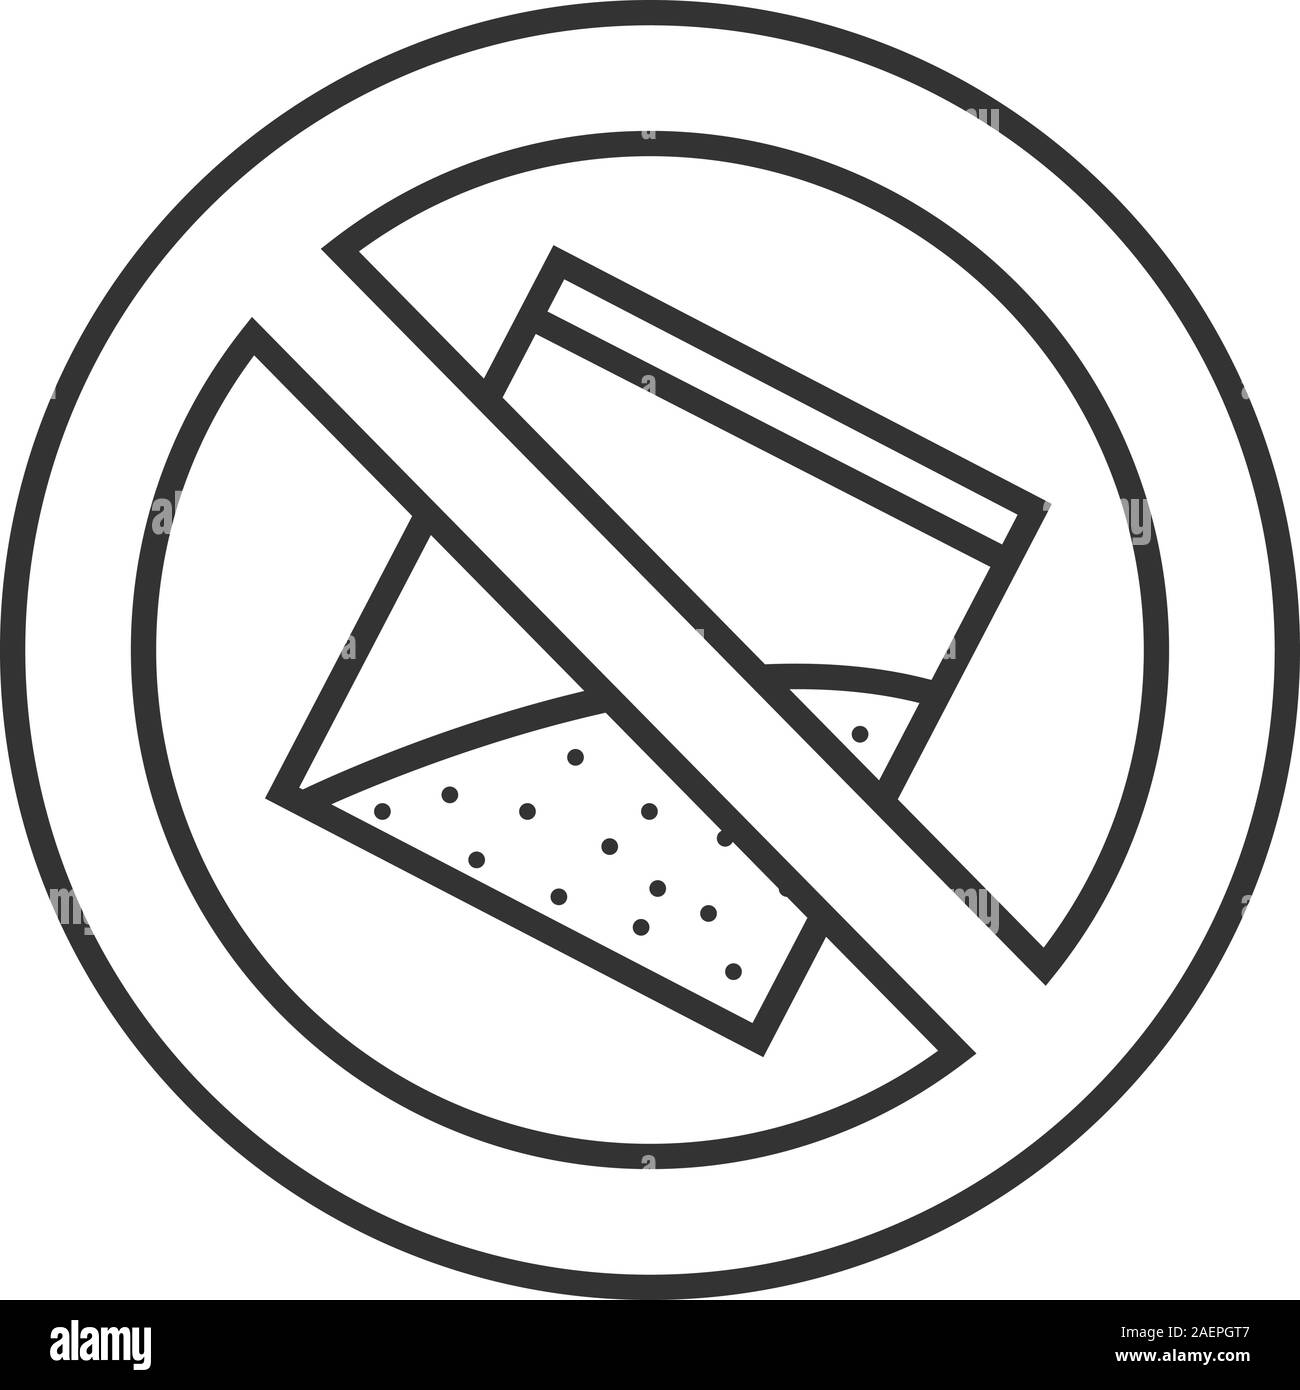 Forbidden sign with bag of powder linear icon. Thin line illustration. No drugs prohibition. Stop contour symbol. Vector isolated outline drawing Stock Vector